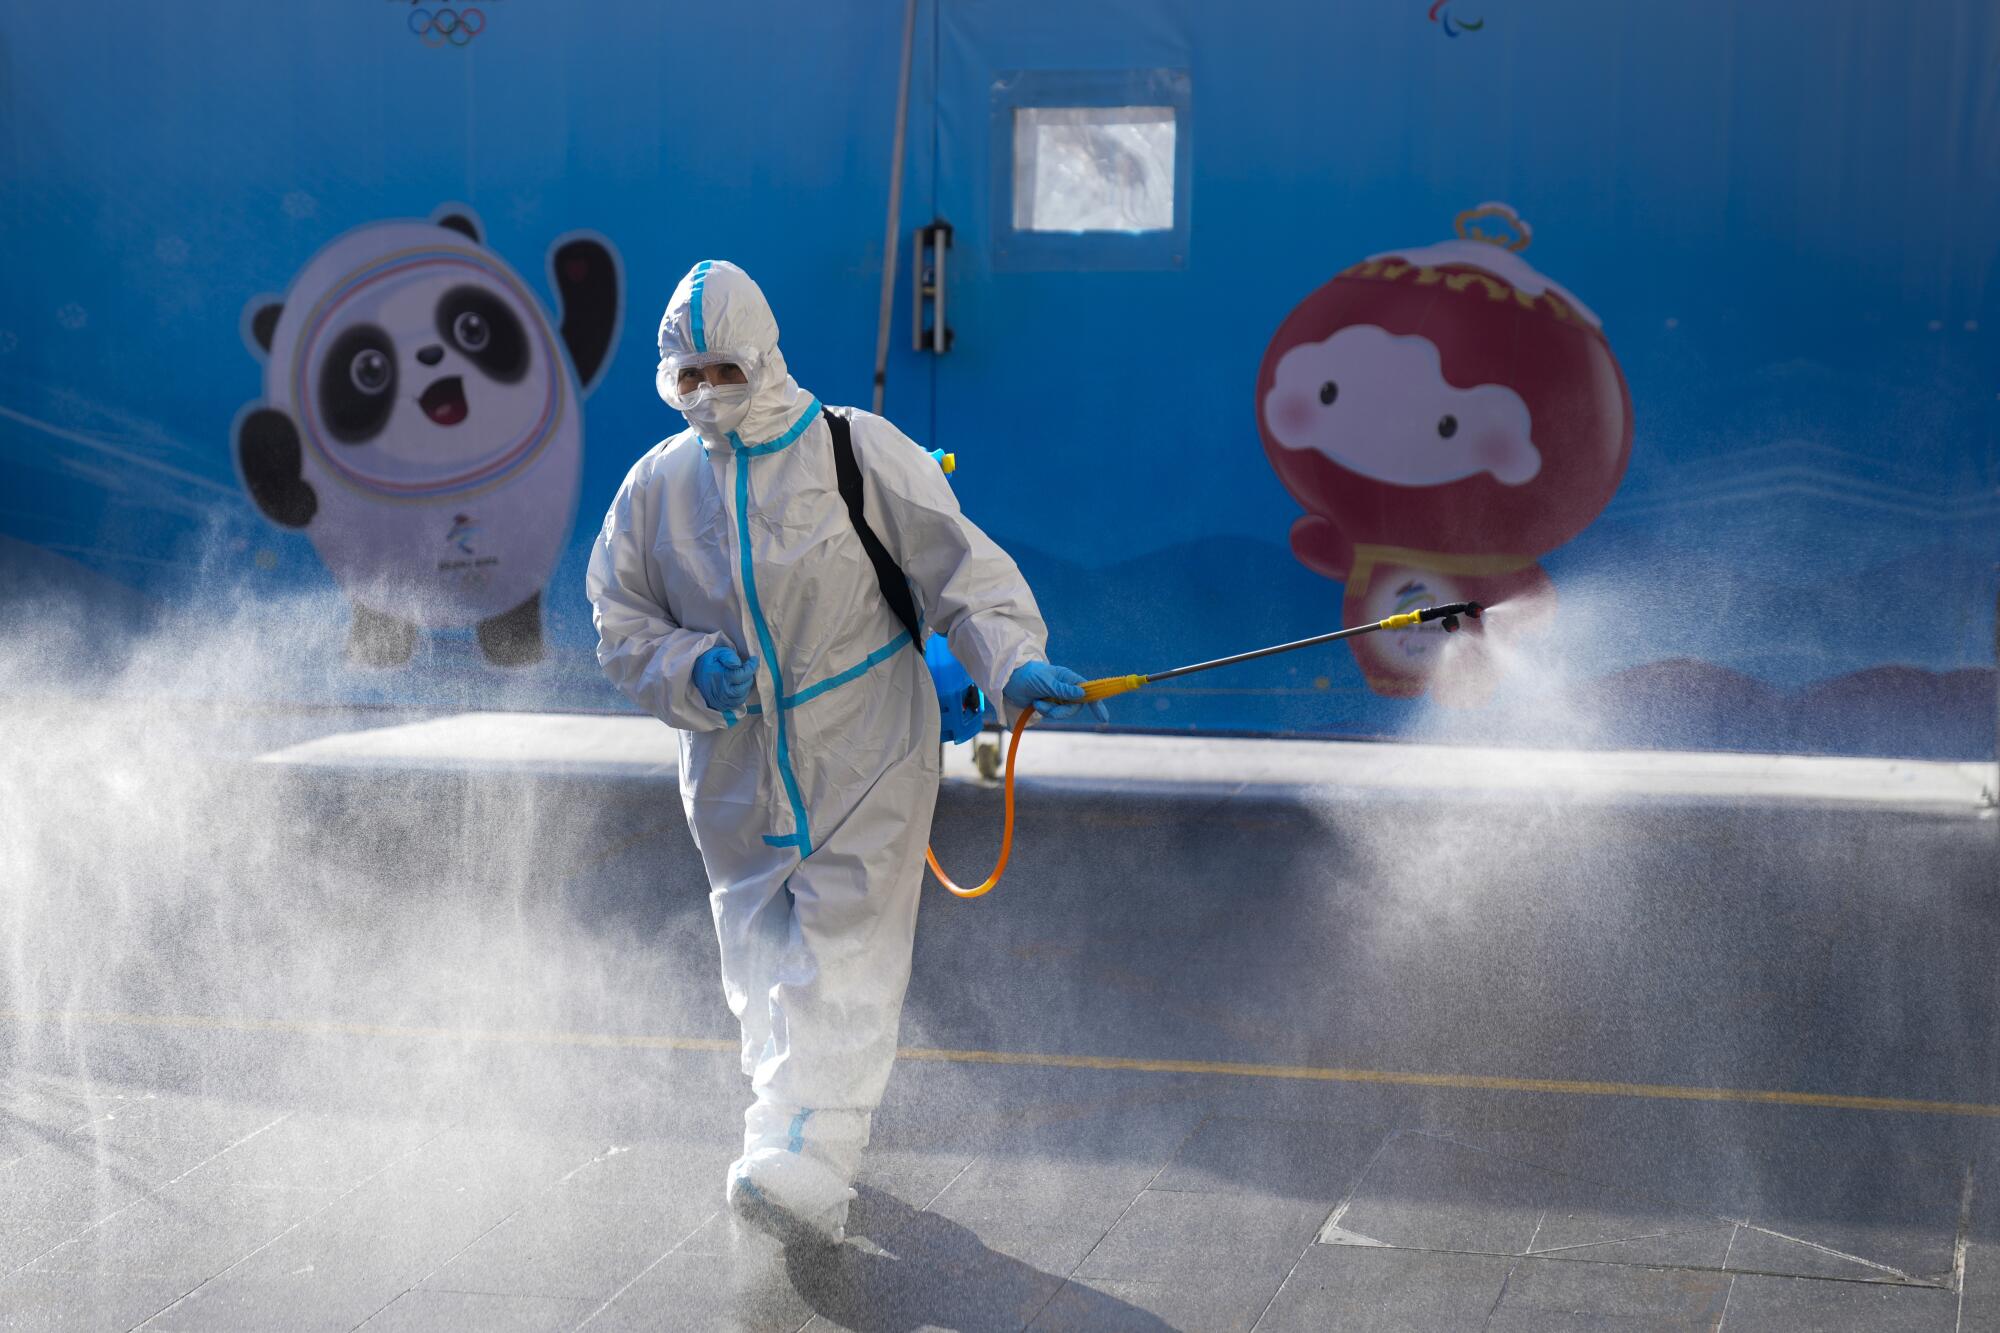 A worker wearing a protective suit sprays disinfectant outside a hotel in Beijing.